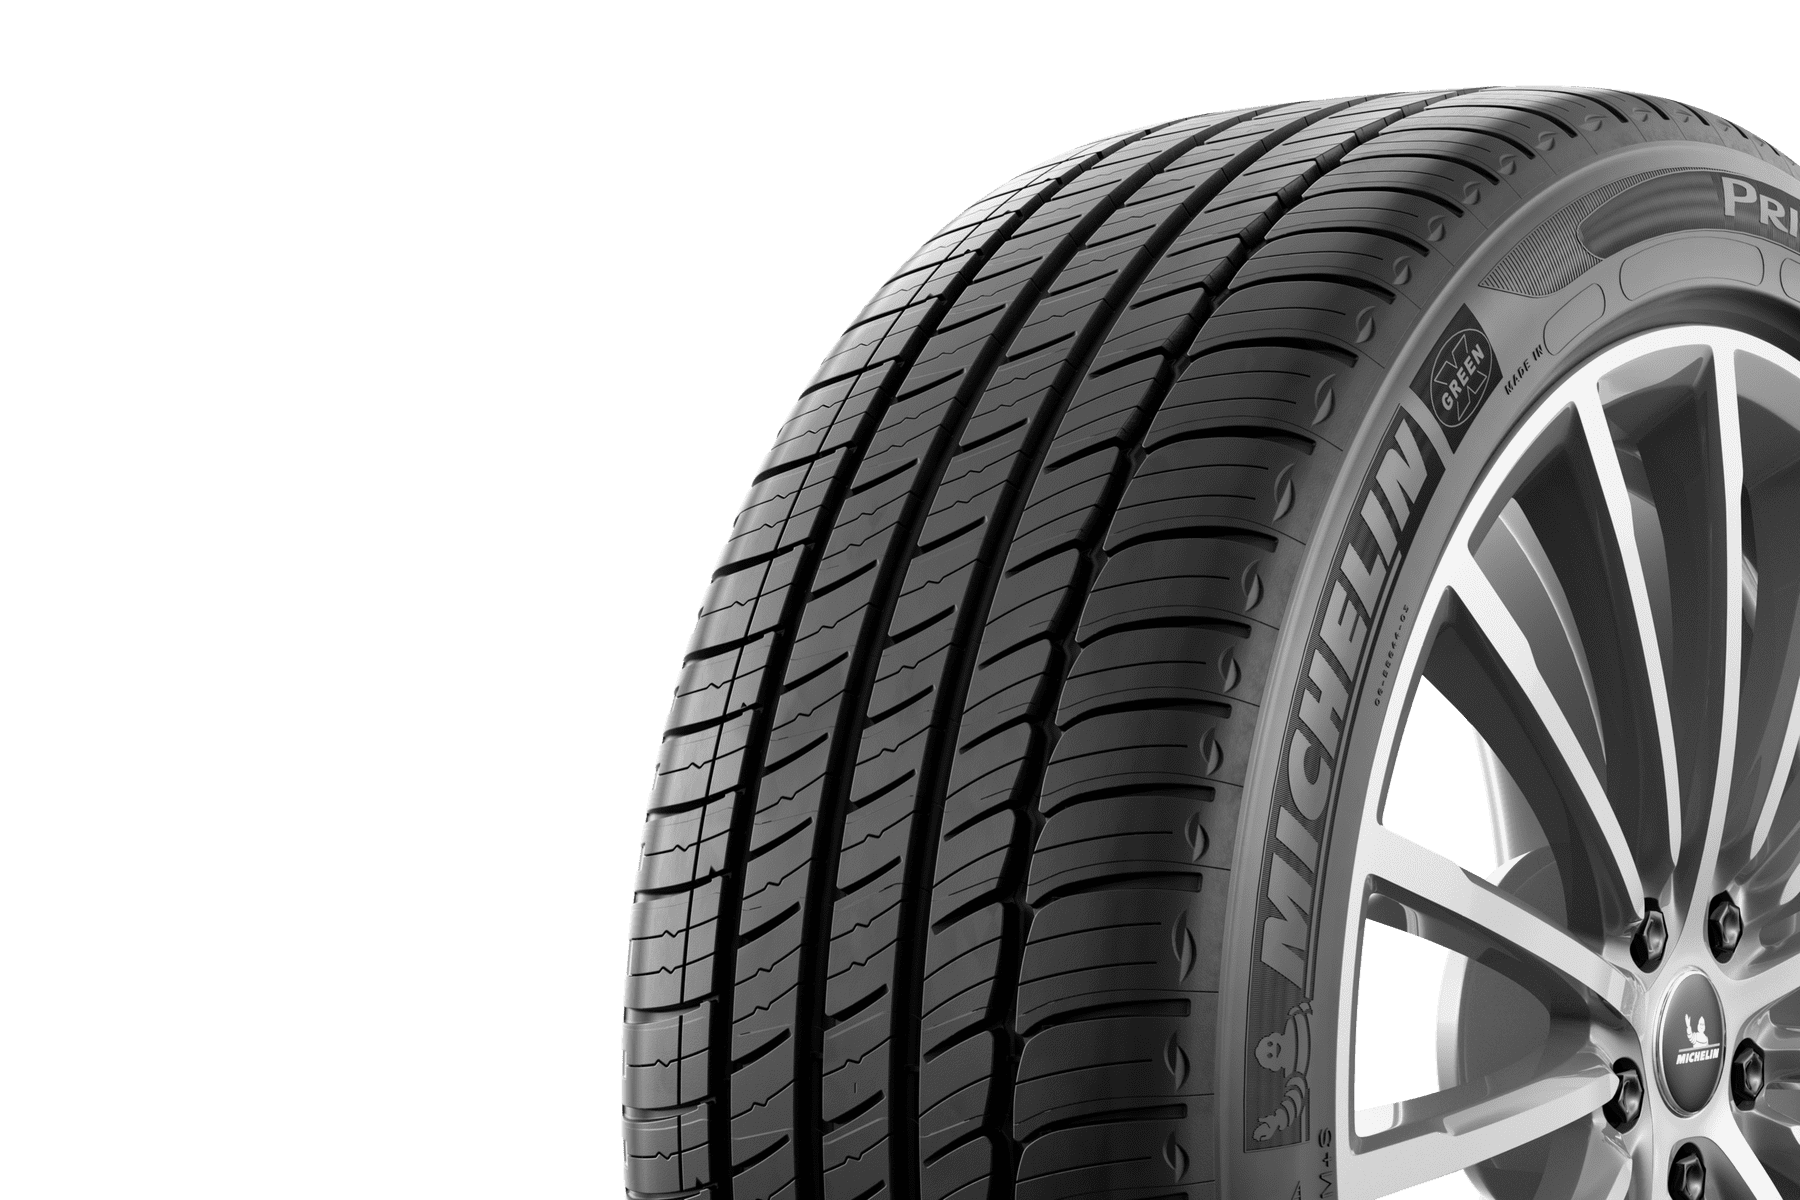 michelin-primacy-mxm4-tire-review-tire-space-tires-reviews-all-brands